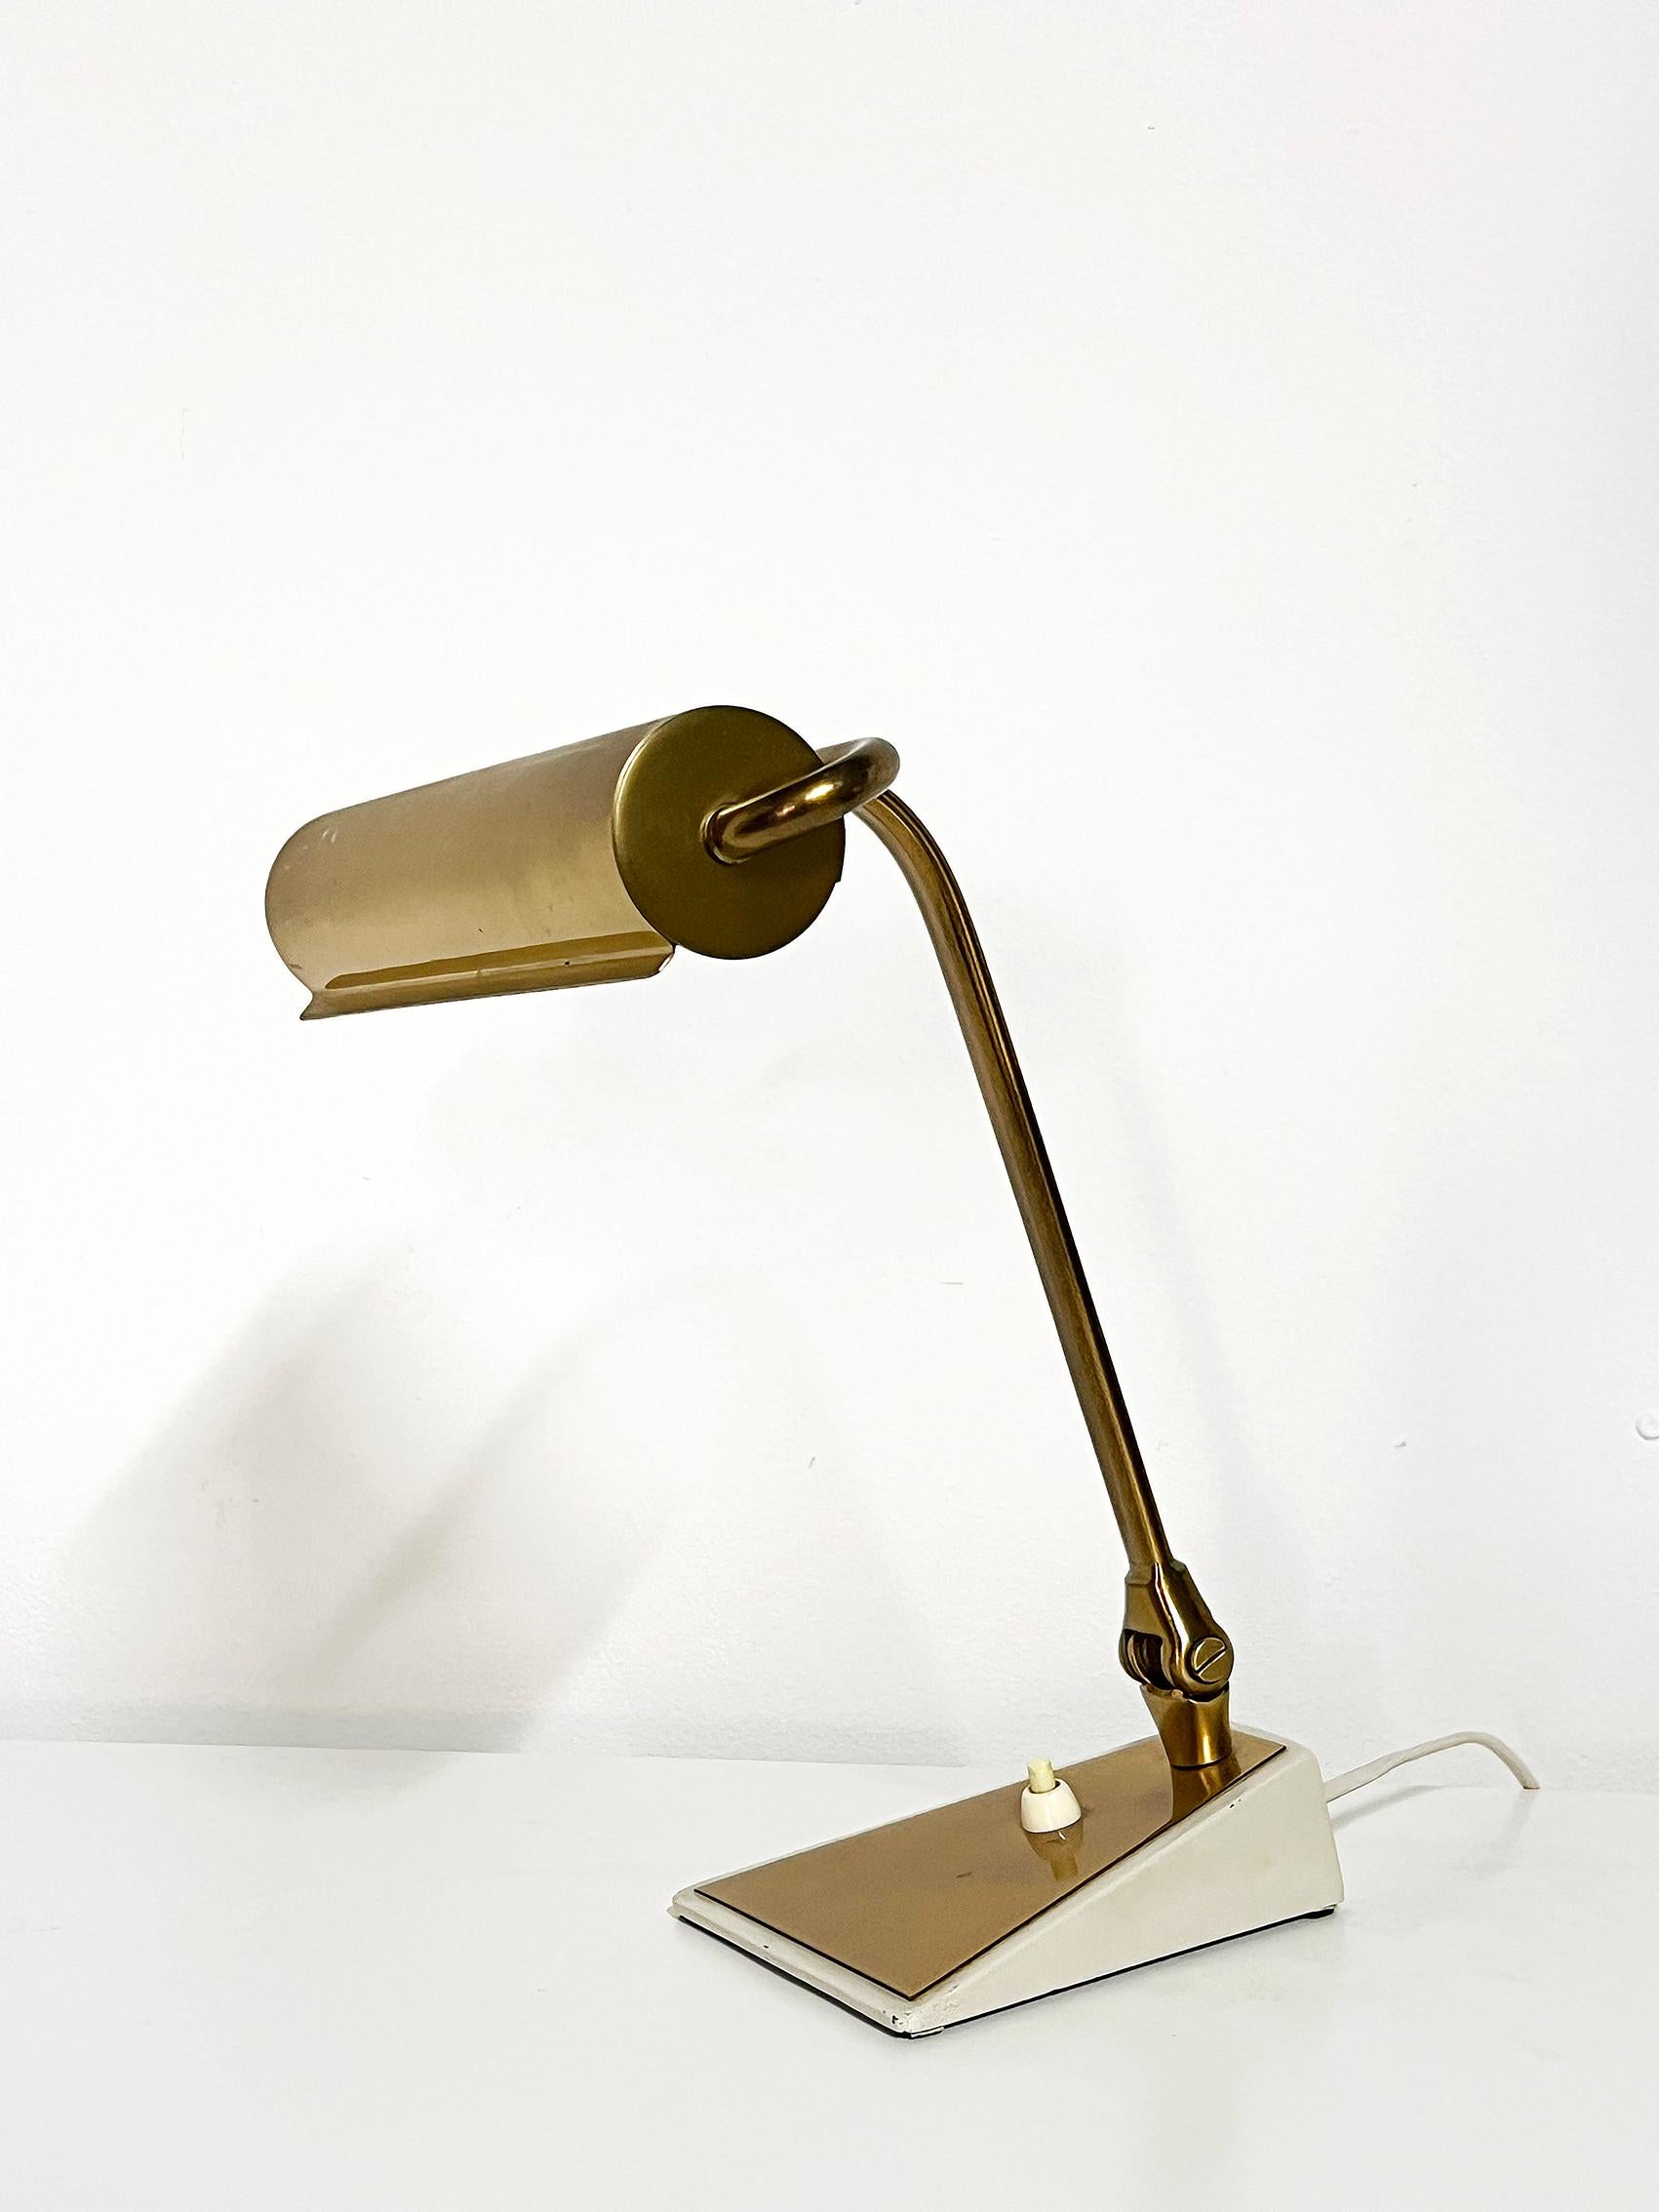 Scandinavian Modern table lamp in brass by Boréns ca 1950-1960's.
Good vintage condition, wear and patina consistent with age and use. 
Brass patina.
Original wiring. We recommend this lamp to be rewired following the buyer's country's electrical